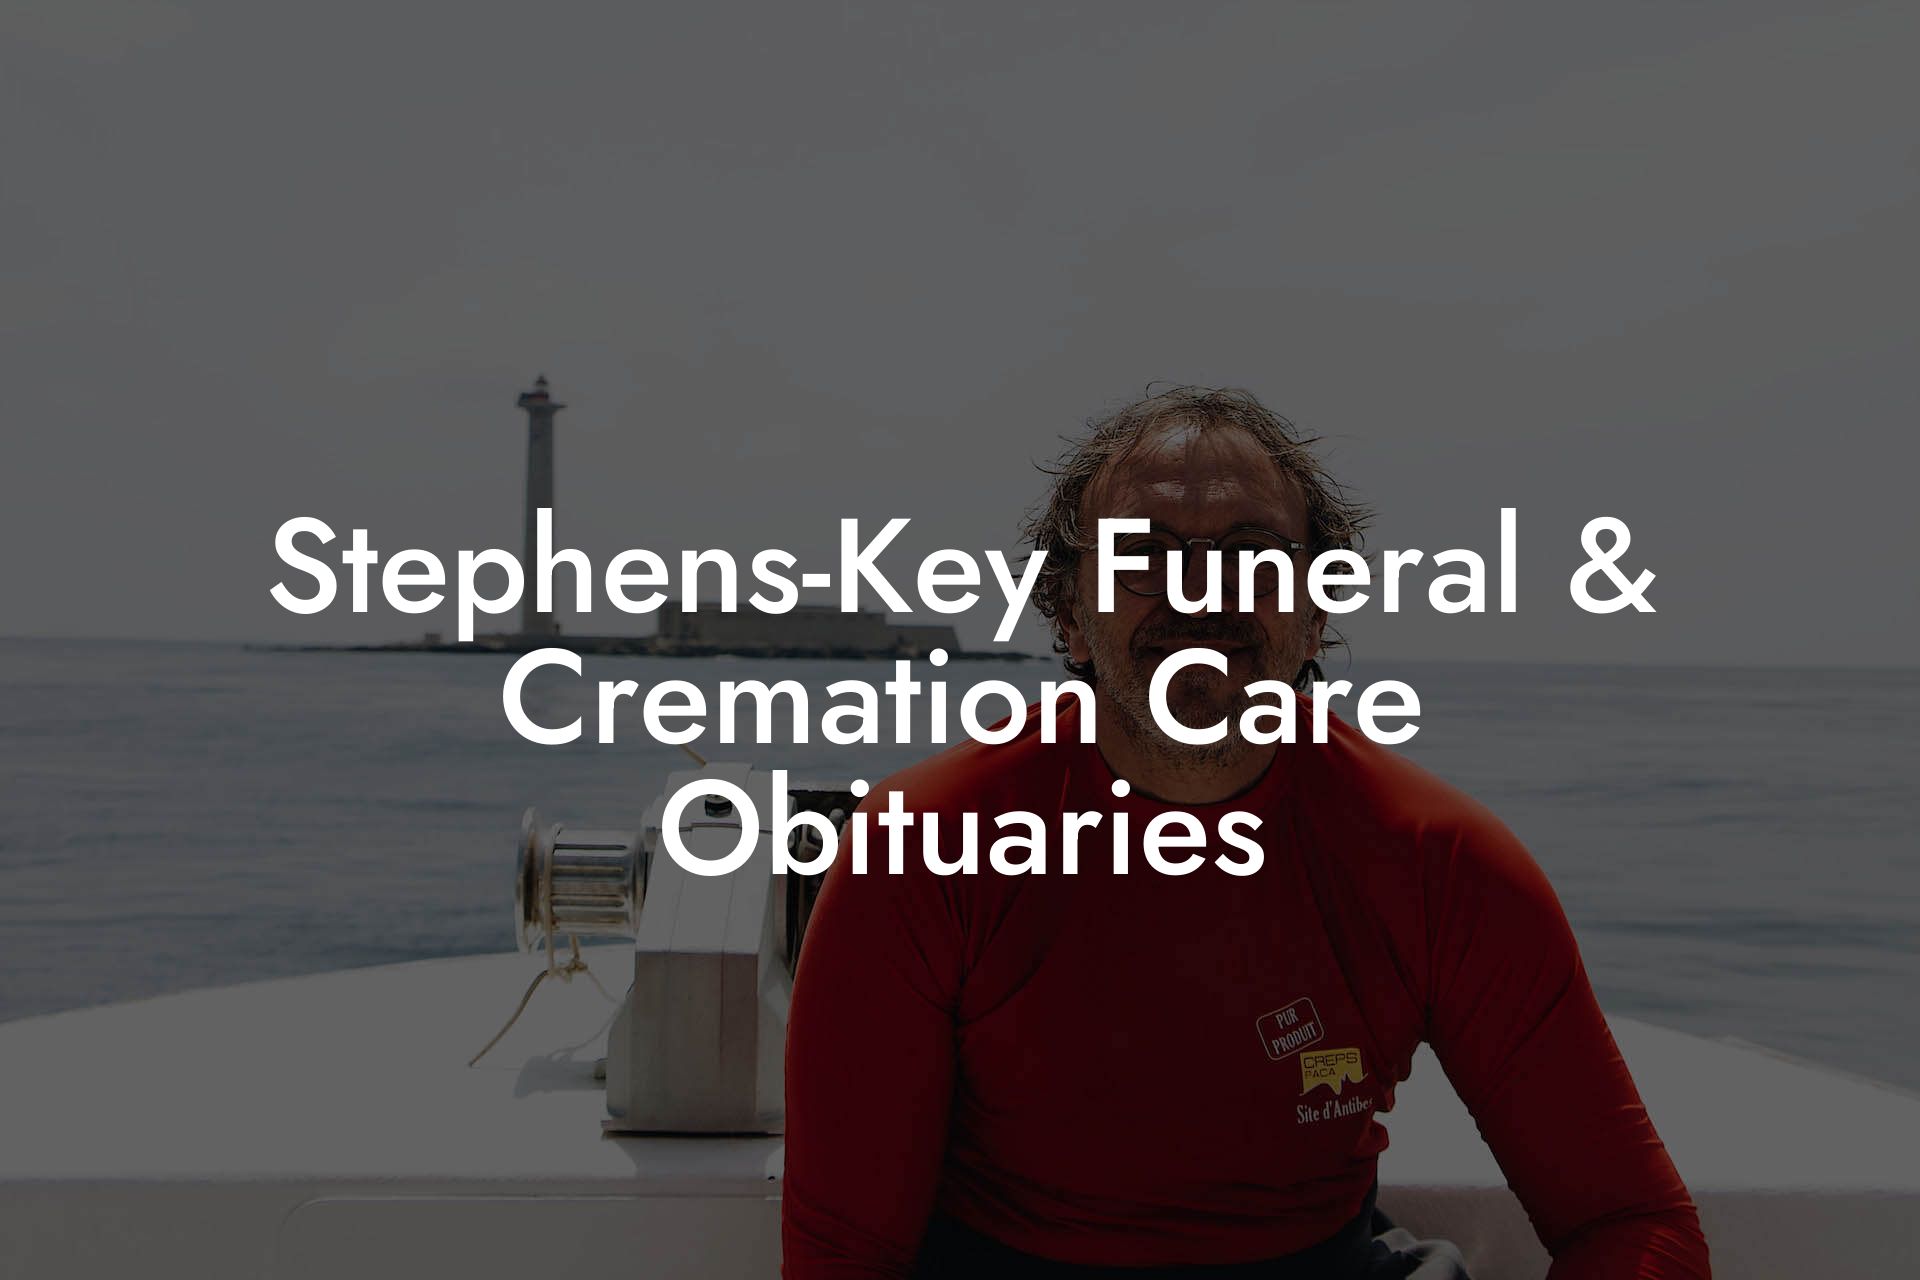 Stephens-Key Funeral & Cremation Care Obituaries